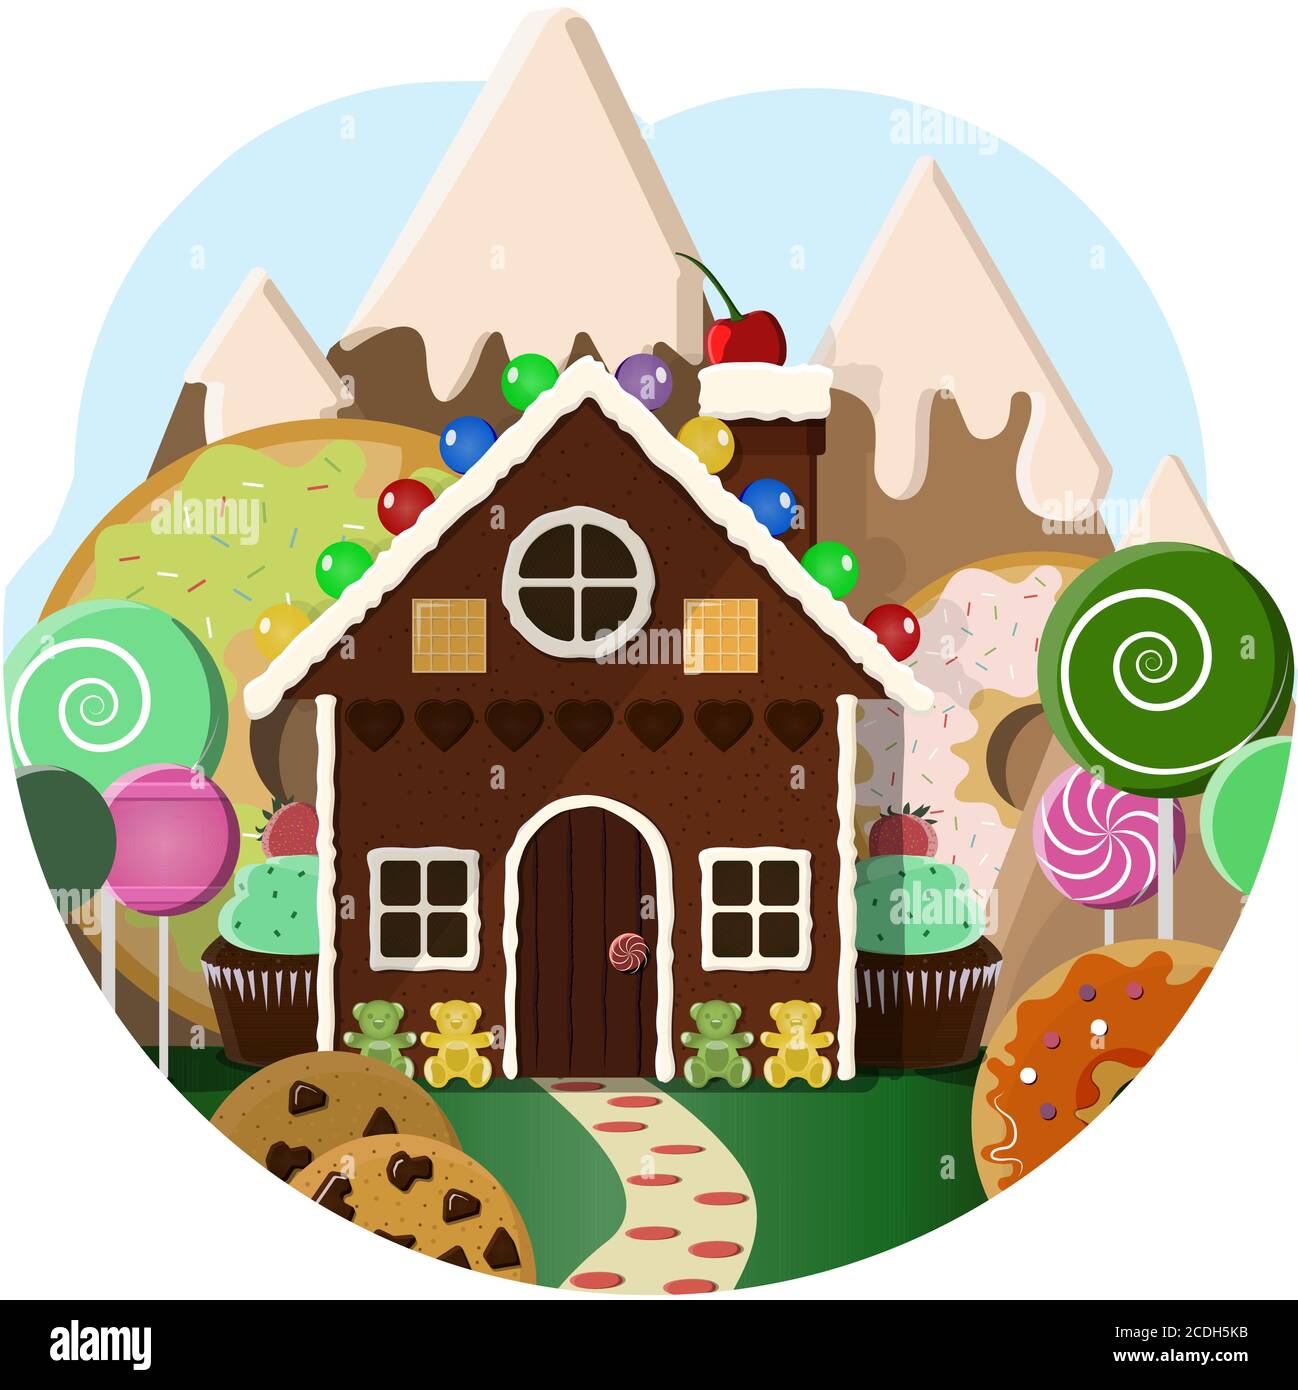 Gingerbread house with Candy trees and sweet mountains in the background. Illustration of a pastry shop with a landscape of lollipops, cupcakes, cookies, doughnuts and fruit. Cartoon bright vector for children, for children s day or greetings. Stock Vector